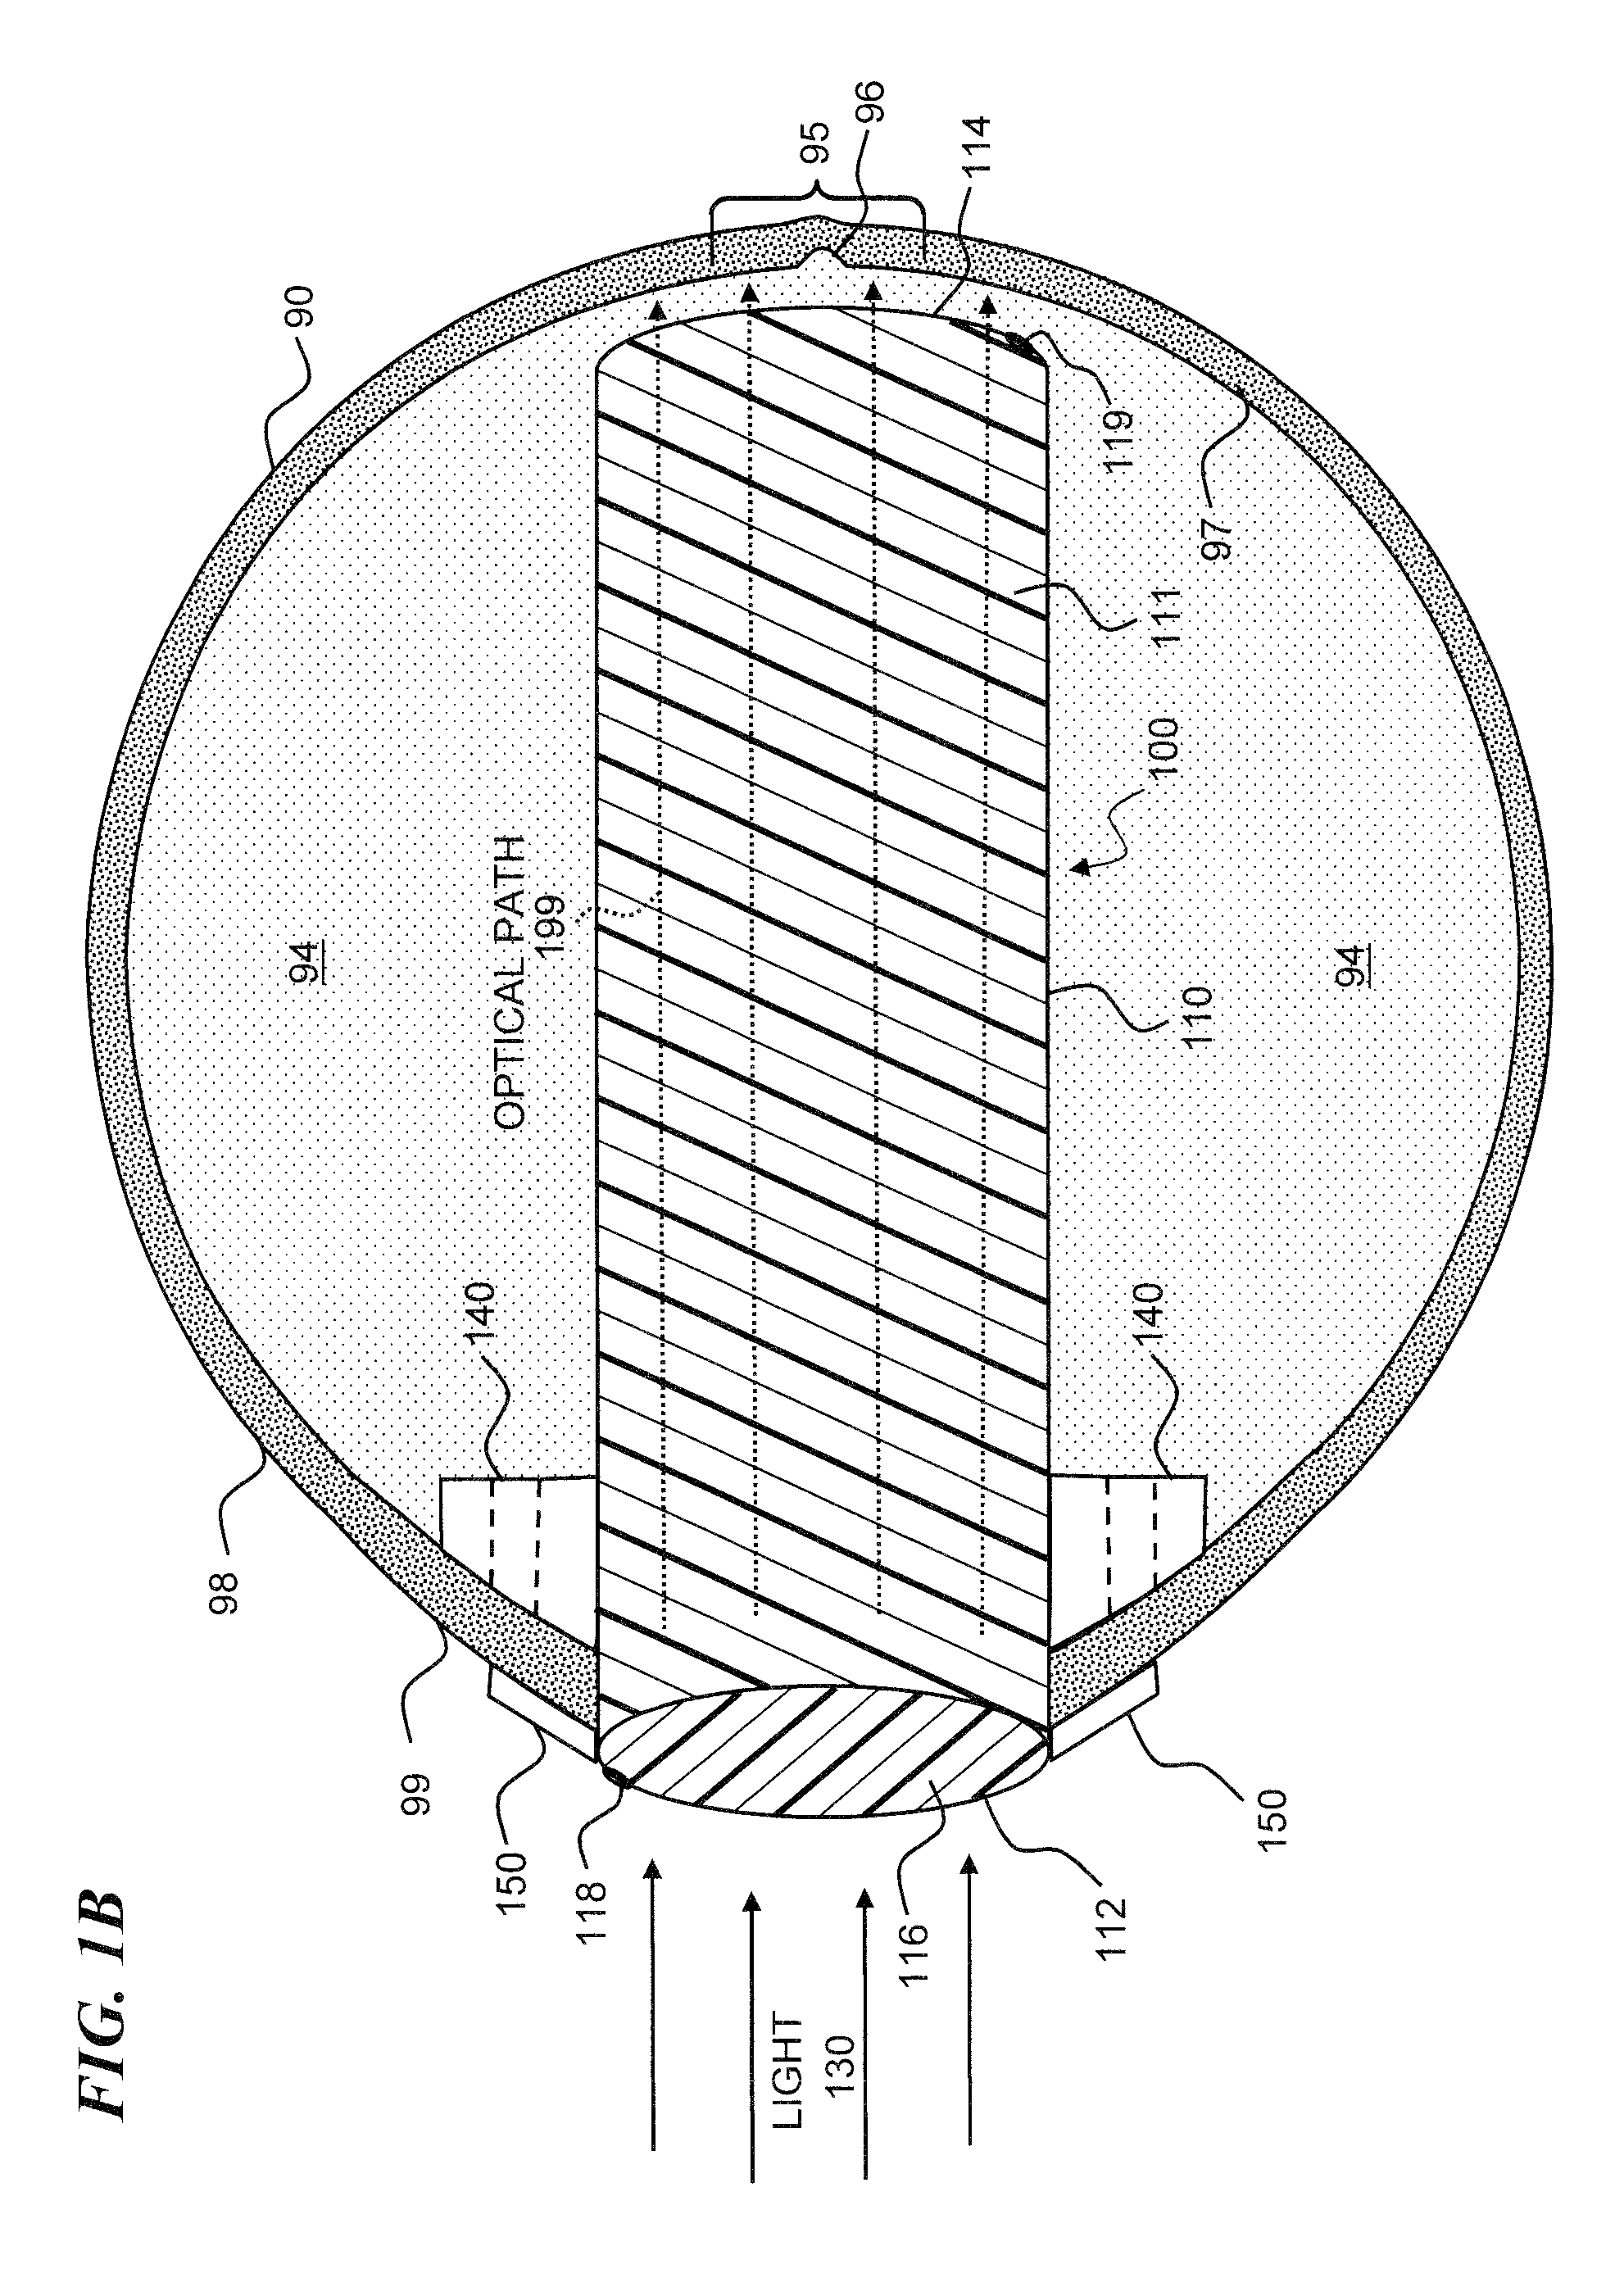 Ocular implant with substantially constant retinal spacing for transmission of nerve-stimulation light